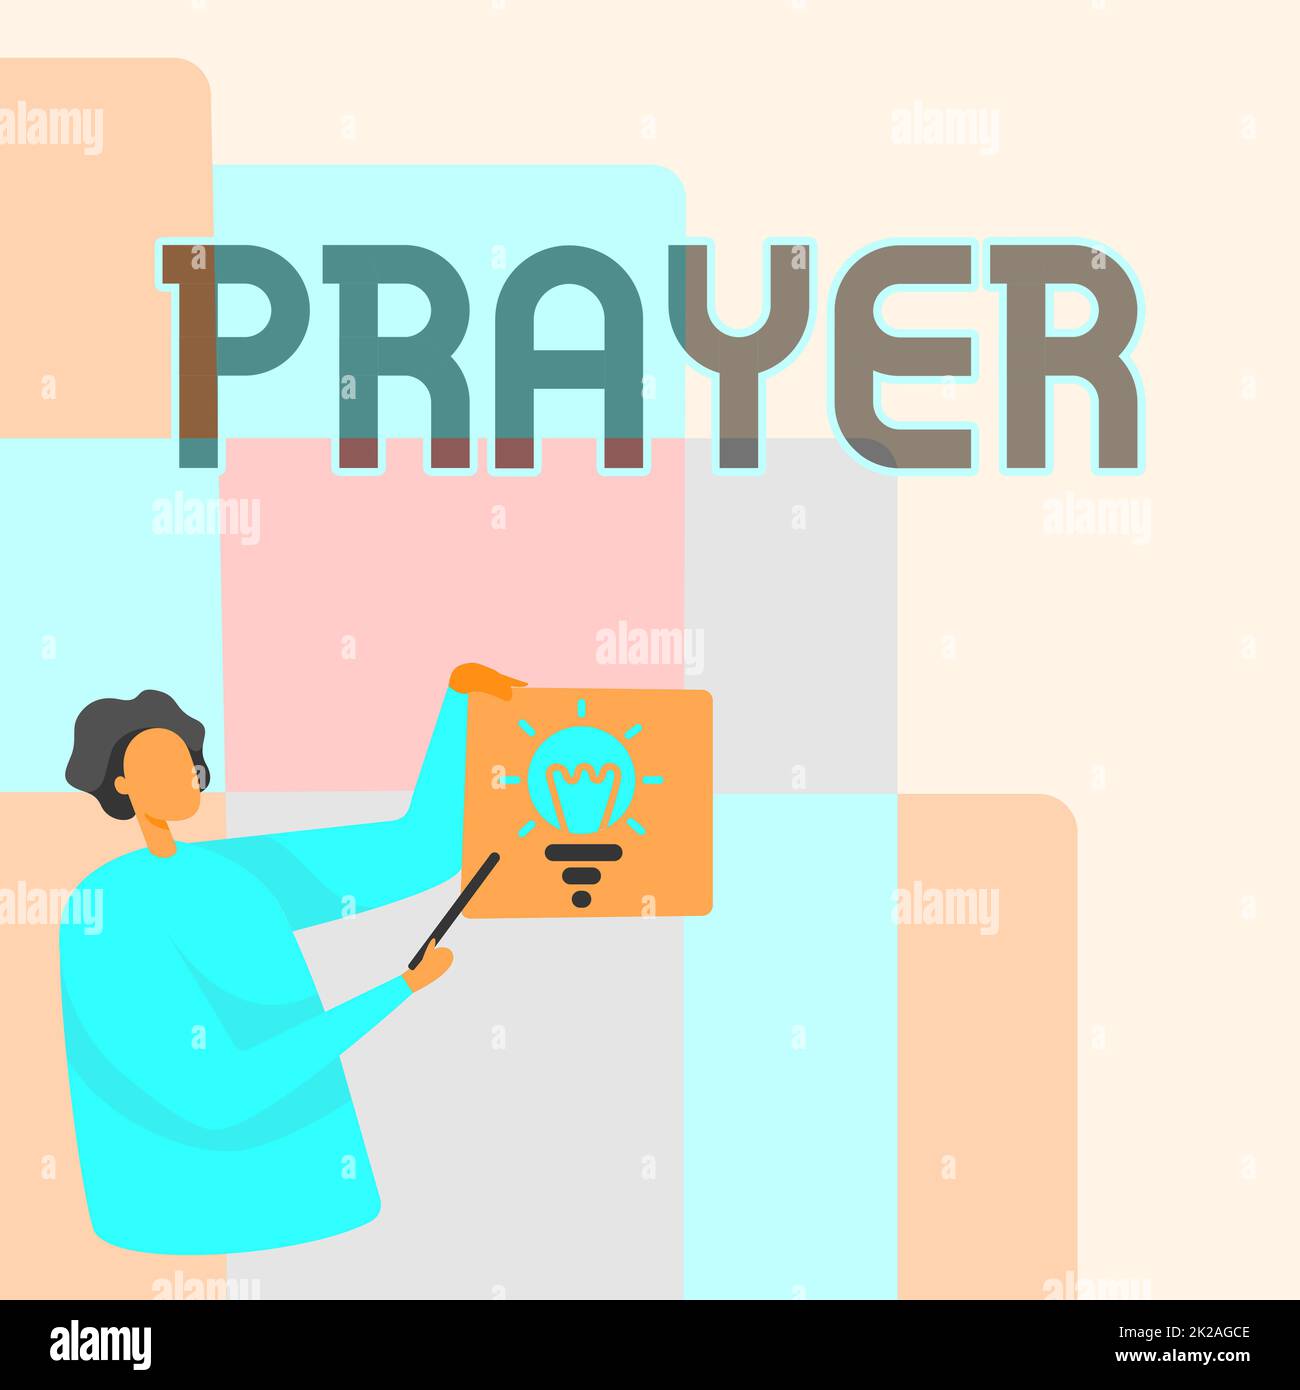 Text sign showing Prayer, Concept meaning solemn request for help or expression of thanks addressed to God Man Standing Holding Paper With Glowing Lig Stock Photo